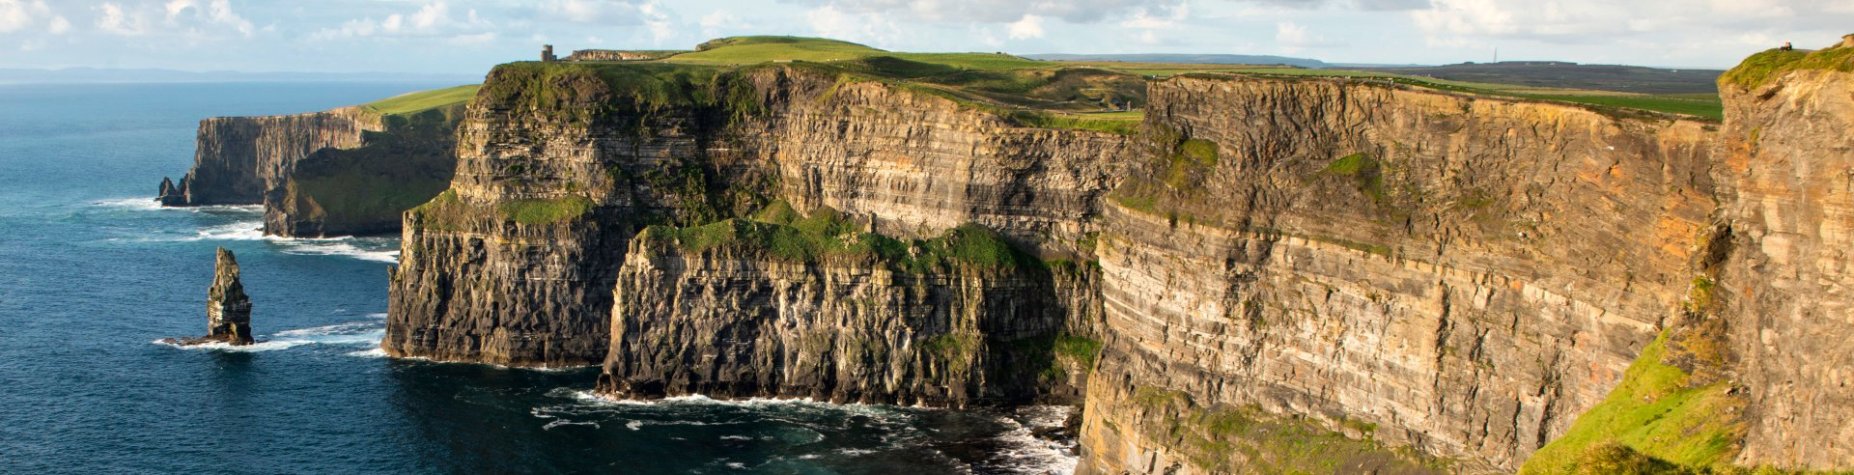 Explore our hostels at the Cliffs of Moher